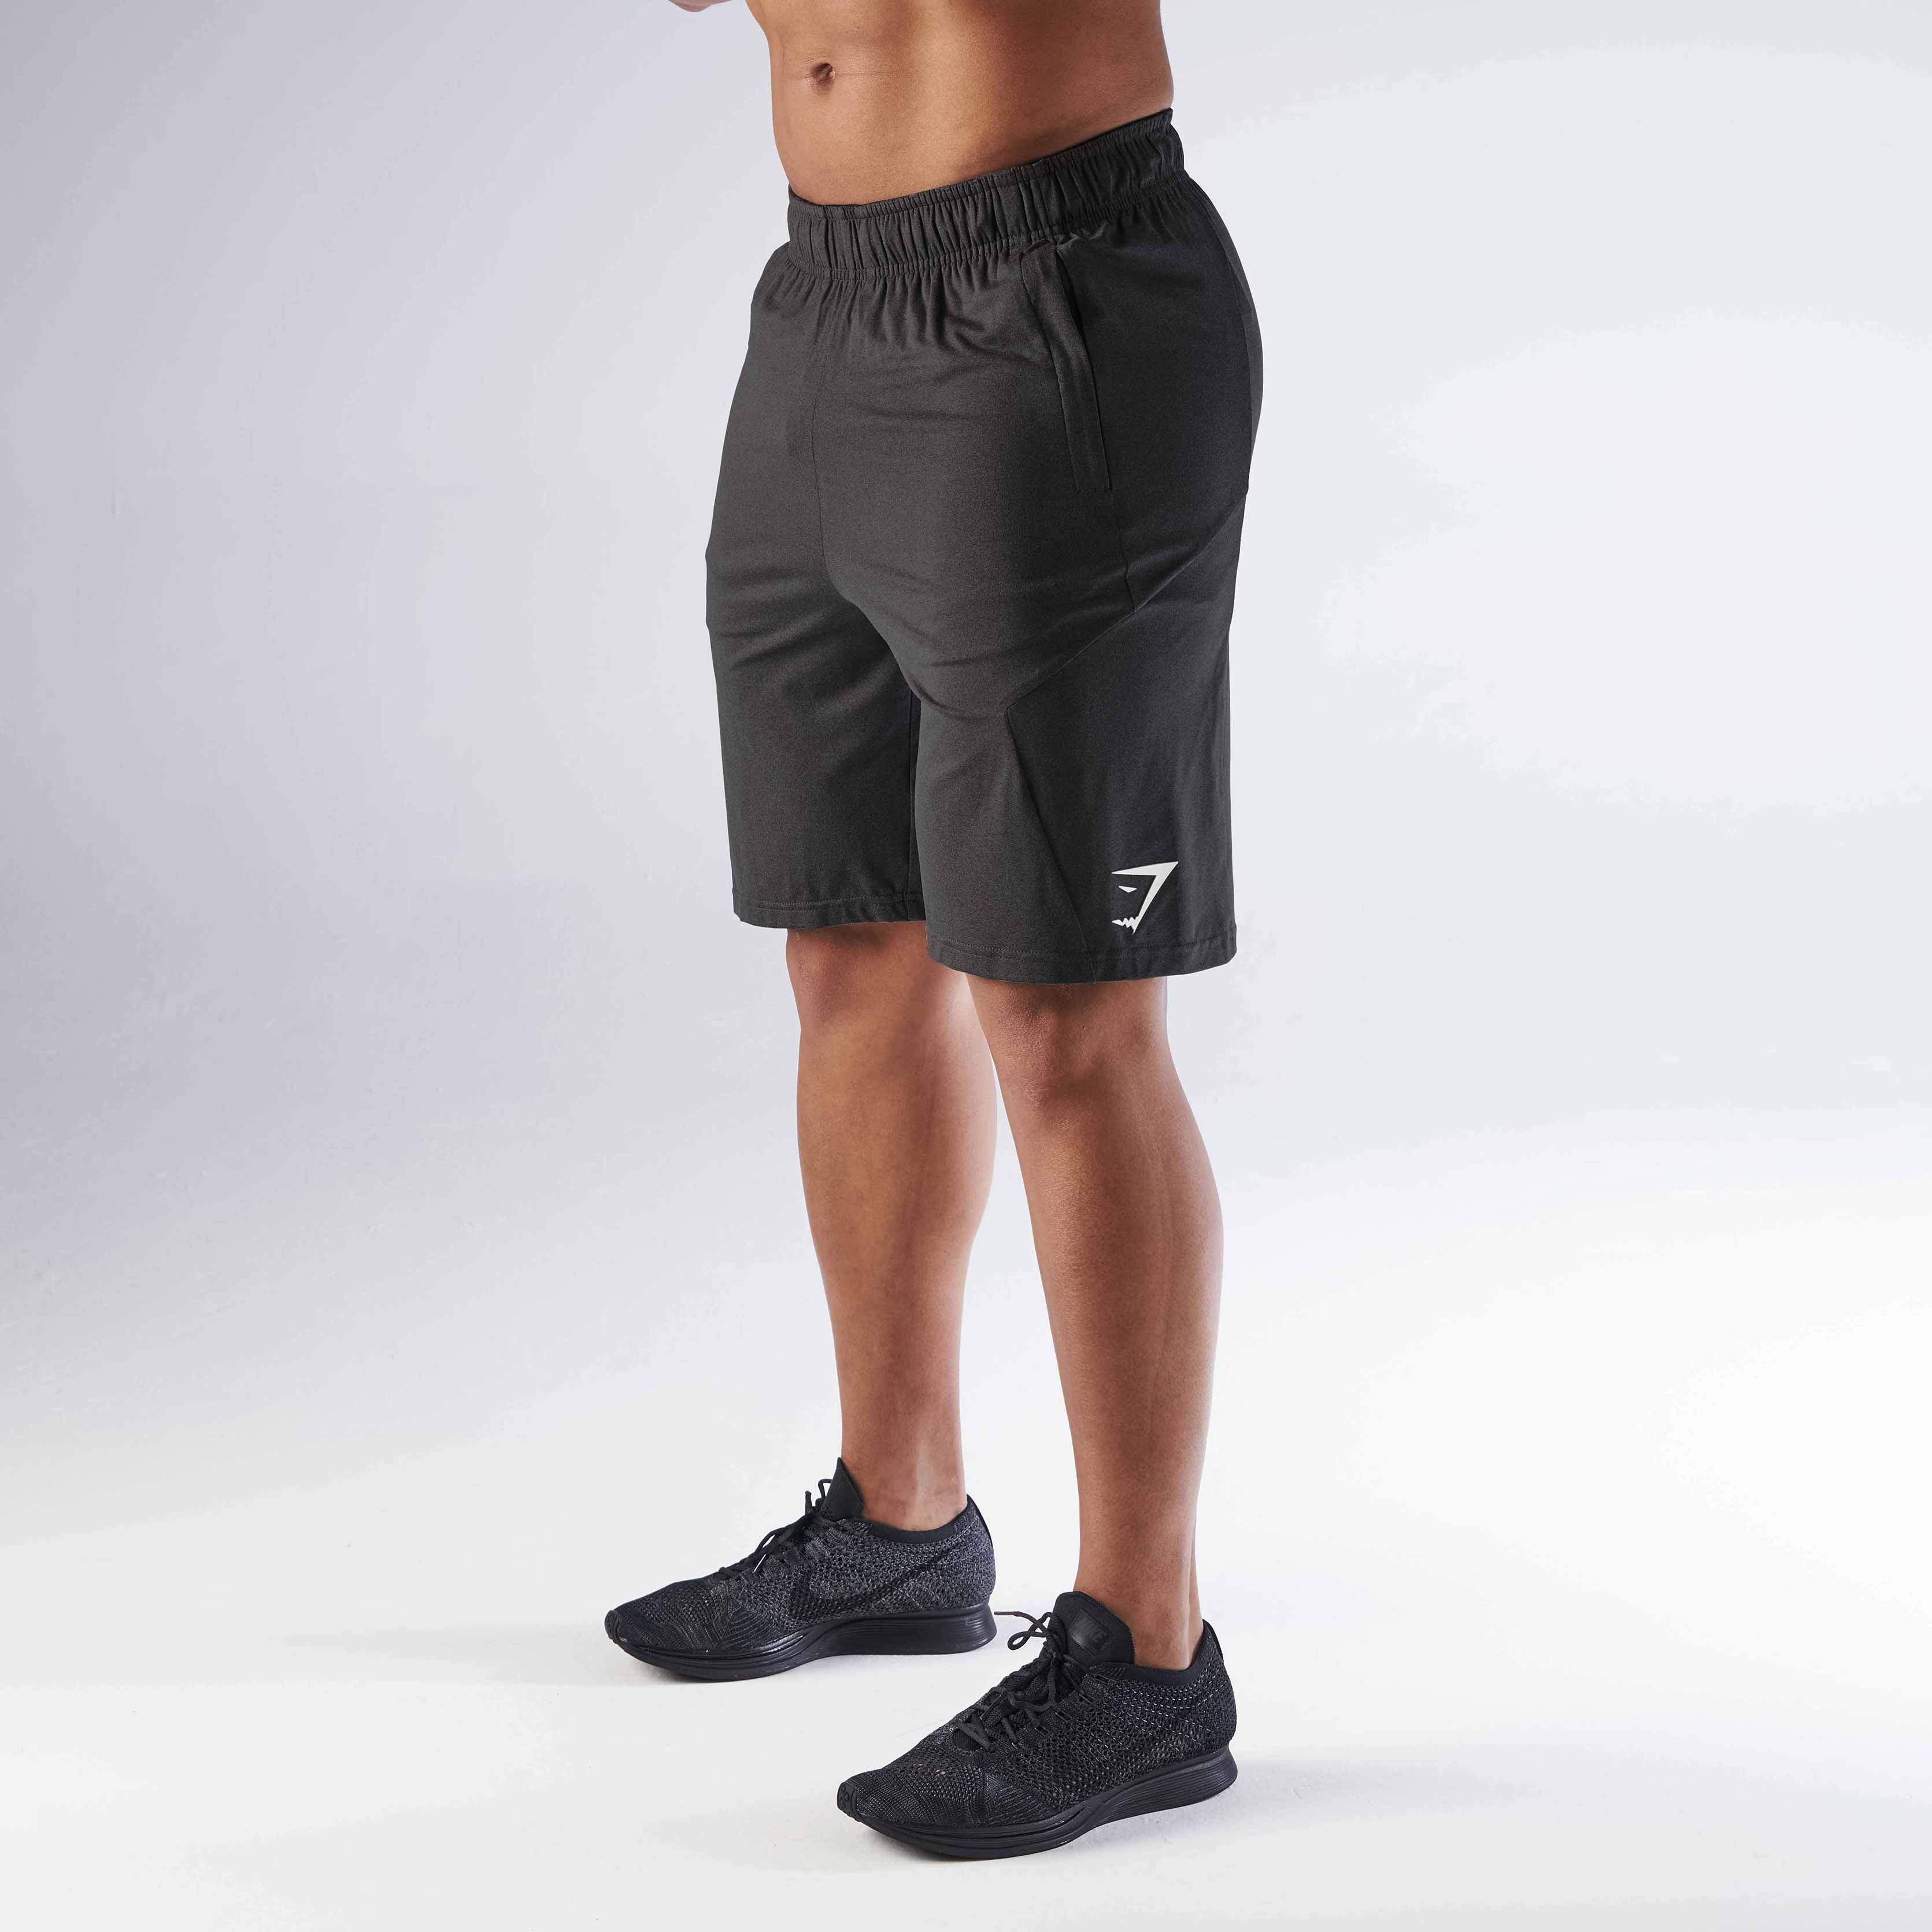 Element Shorts in Black Marl - view 3